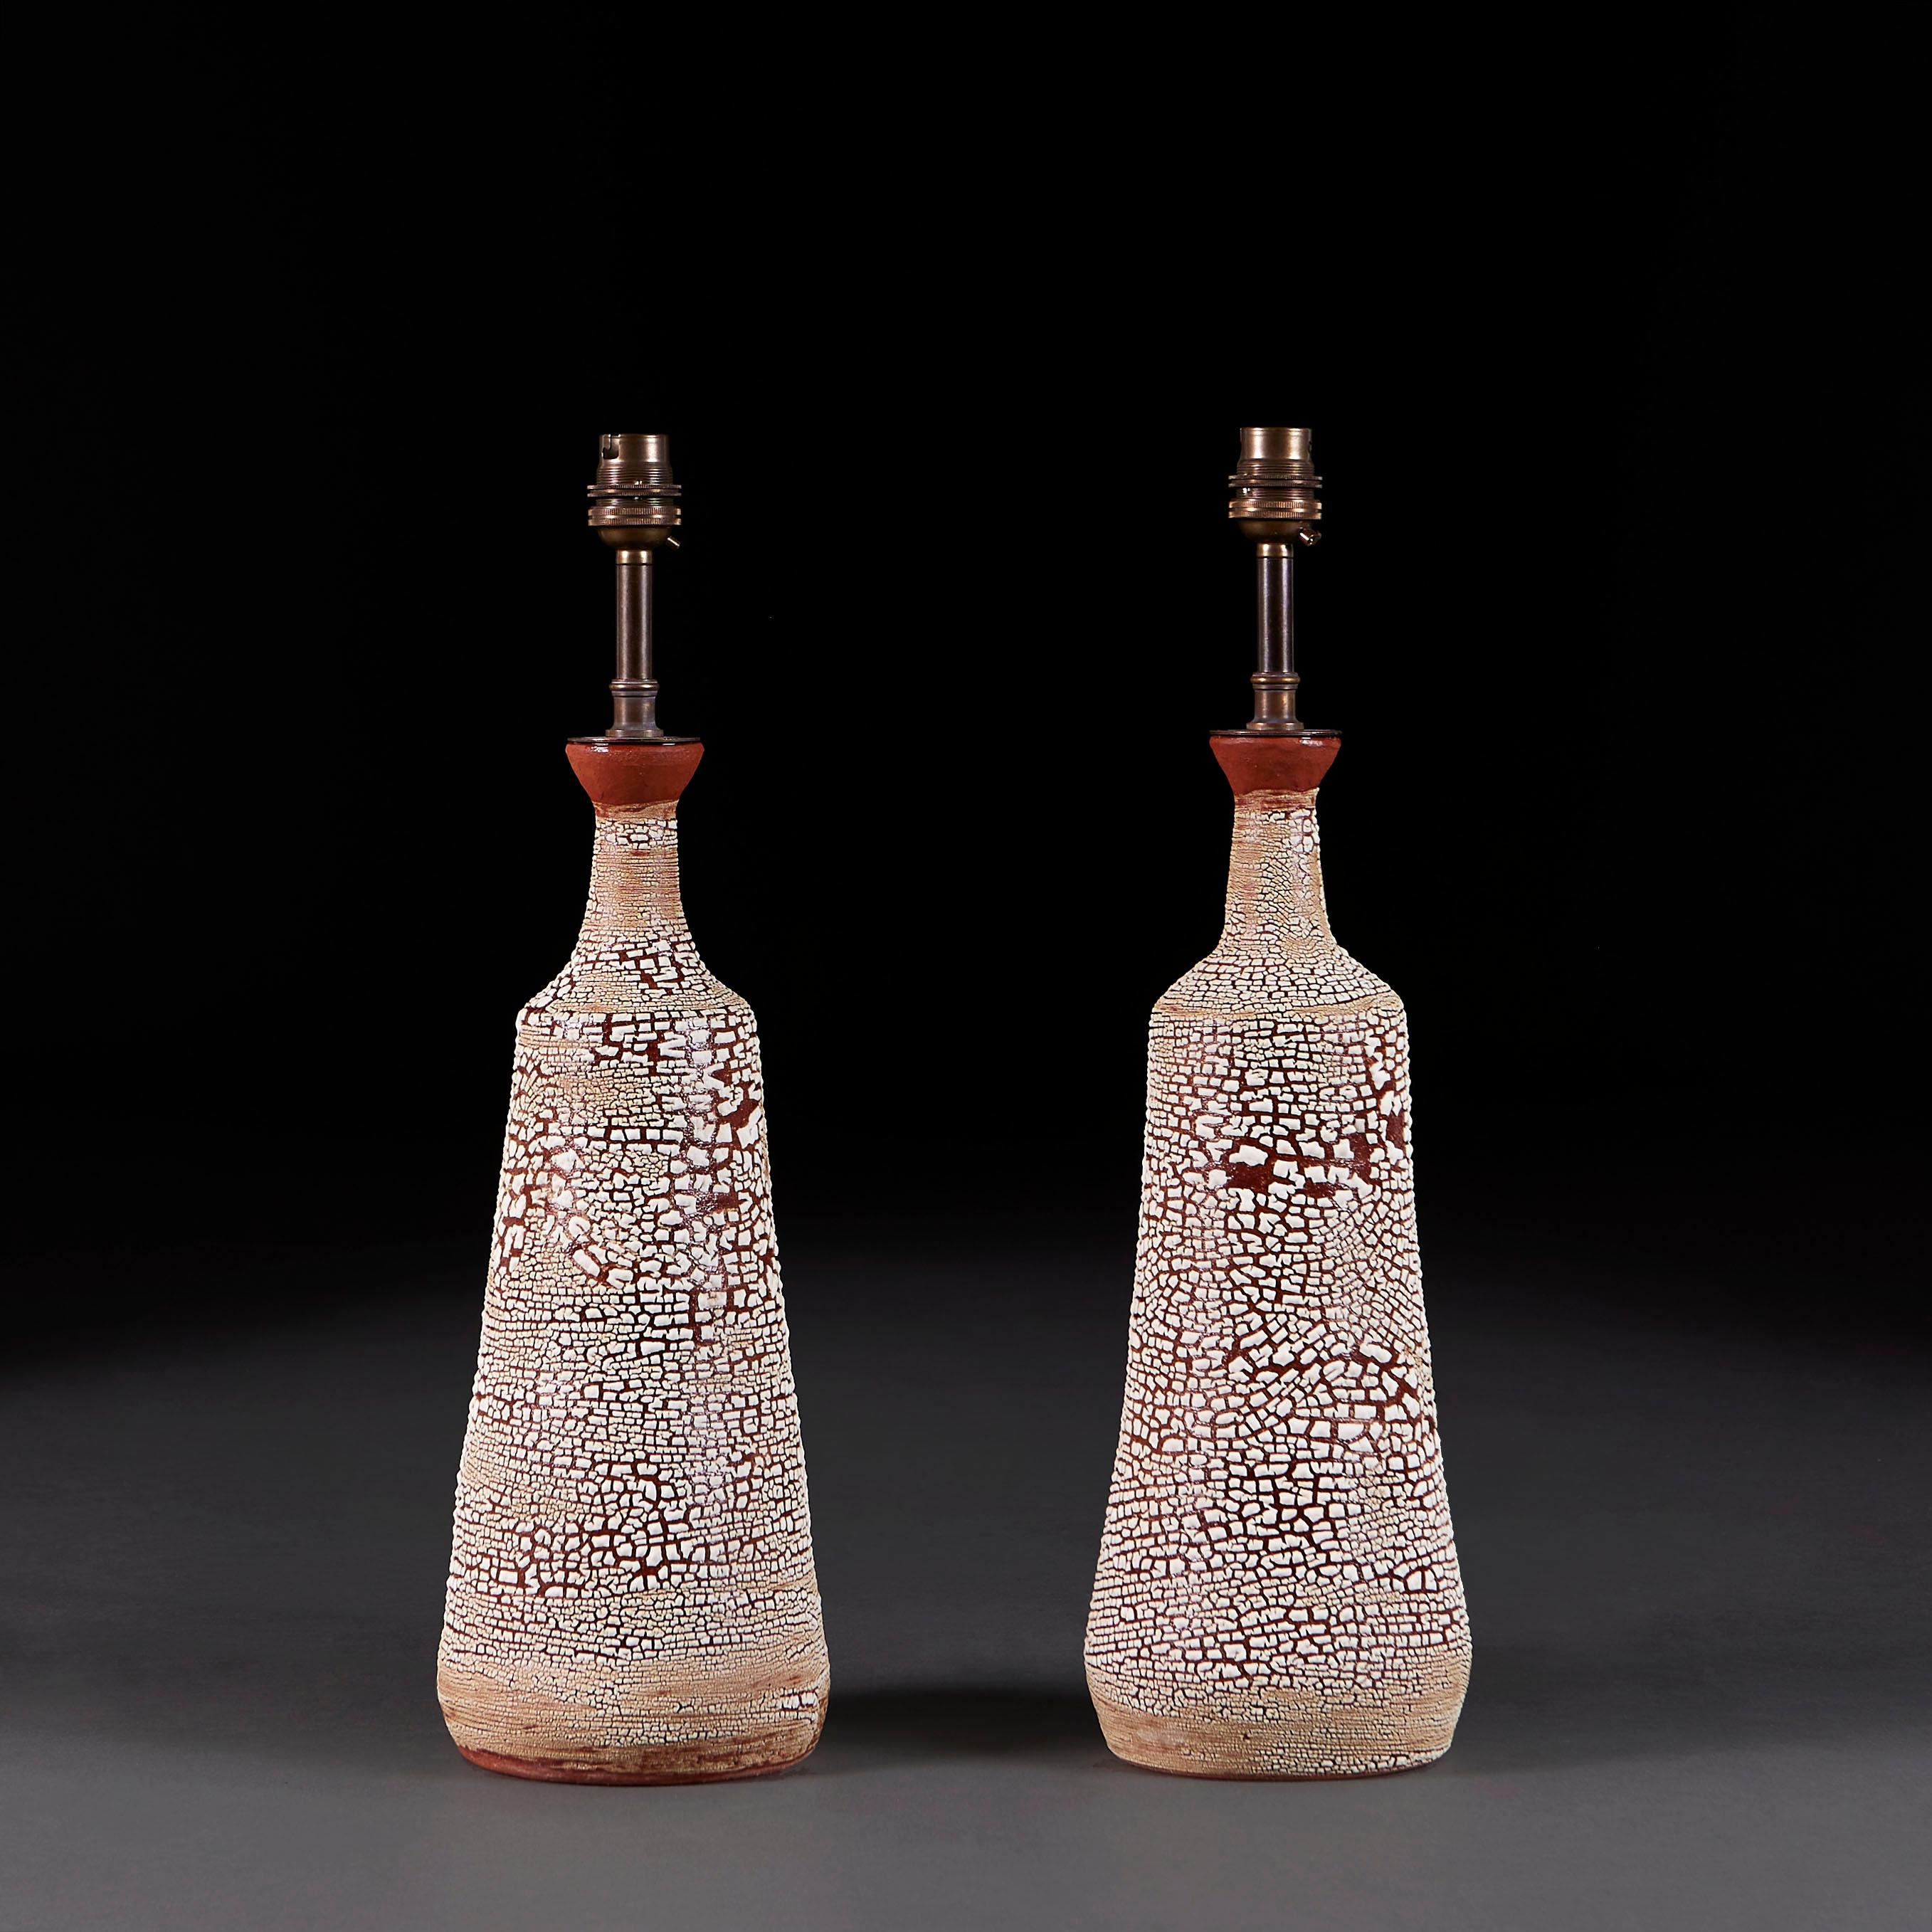 English A Pair of Terracotta Art Pottery Lamps